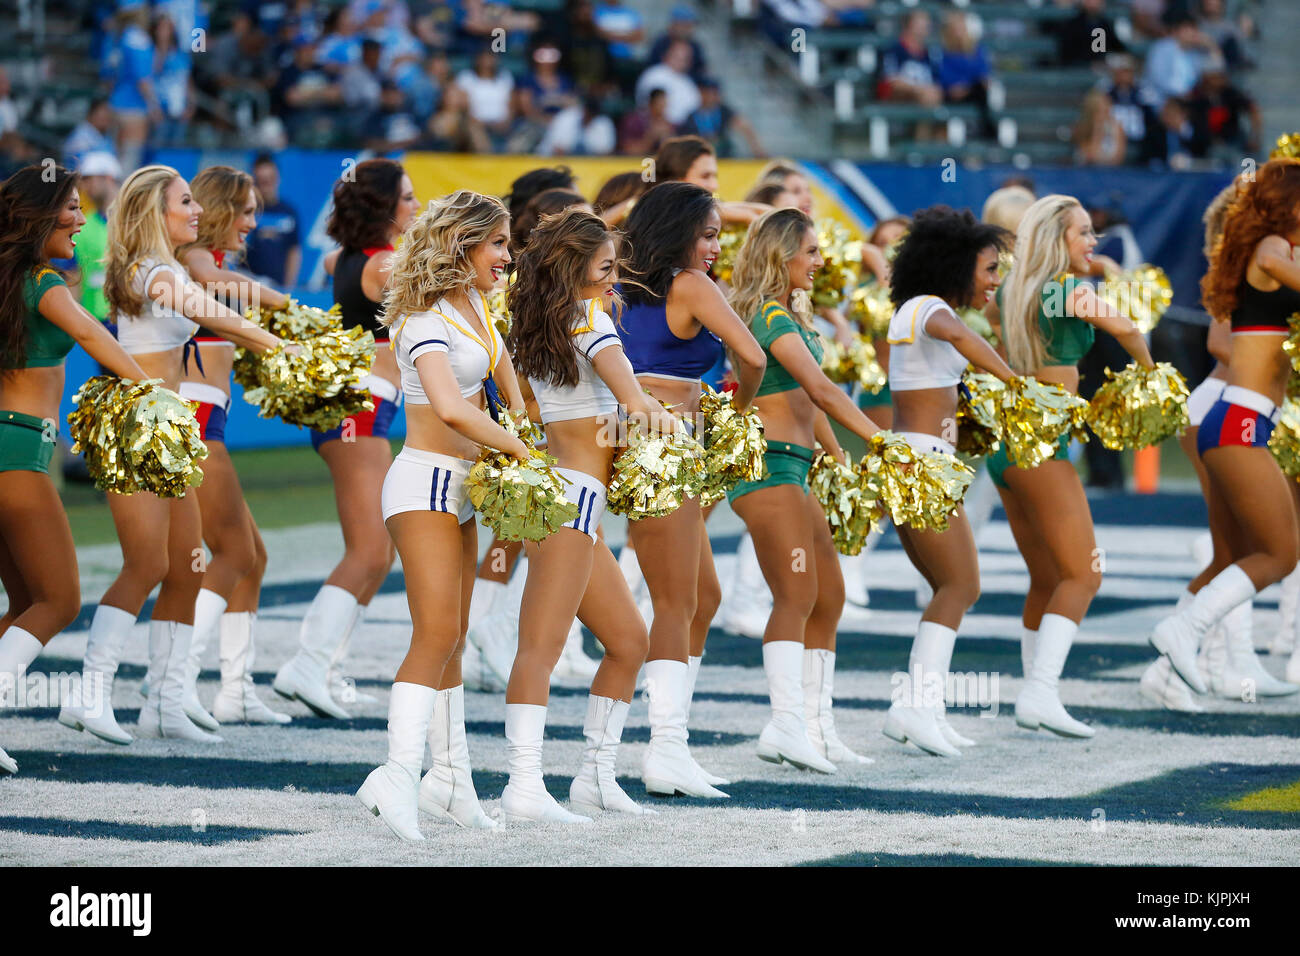 November 19, 2017 Los Angeles Chargers cheerleaders during the football game between the Buffalo Bills and the Los Angeles Chargers at the StubHub Center in Carson, California. Charles Baus/CSM Stock Photo